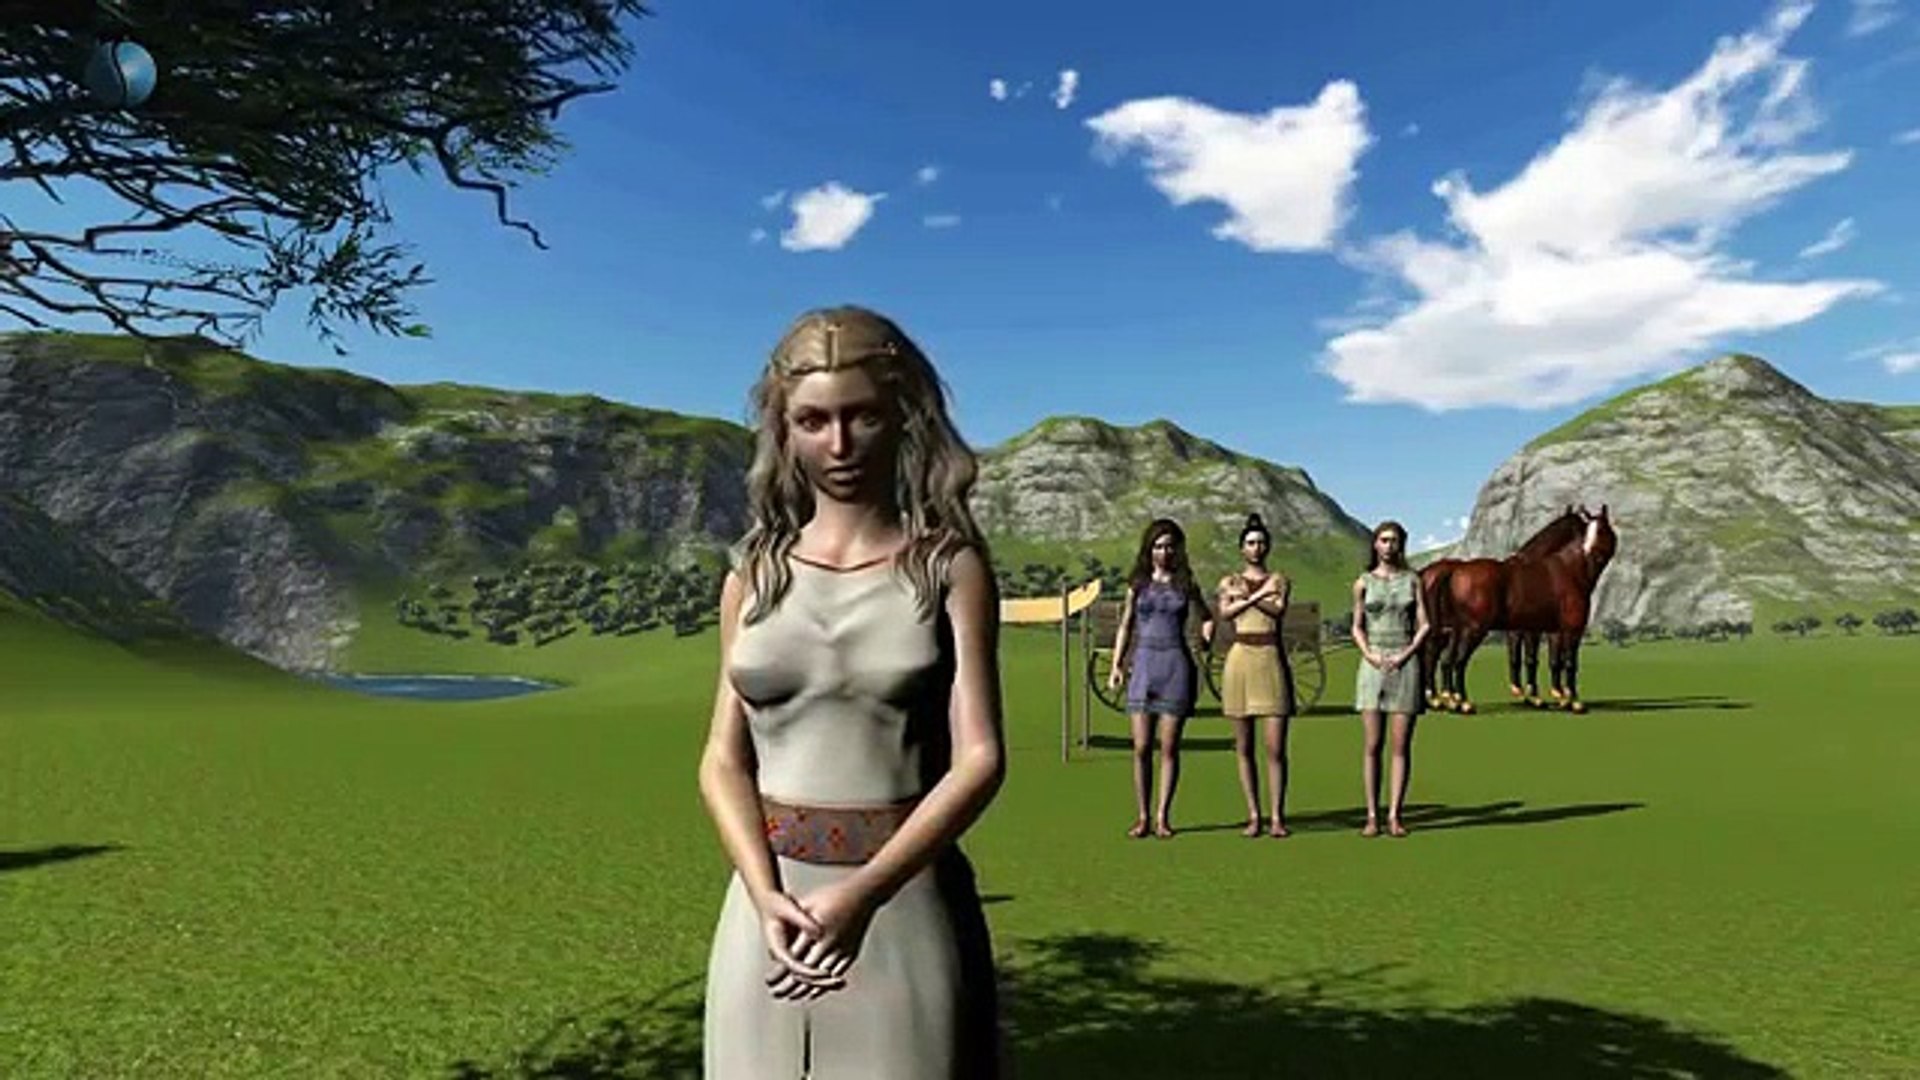 The Odyssey 3D Animation Film